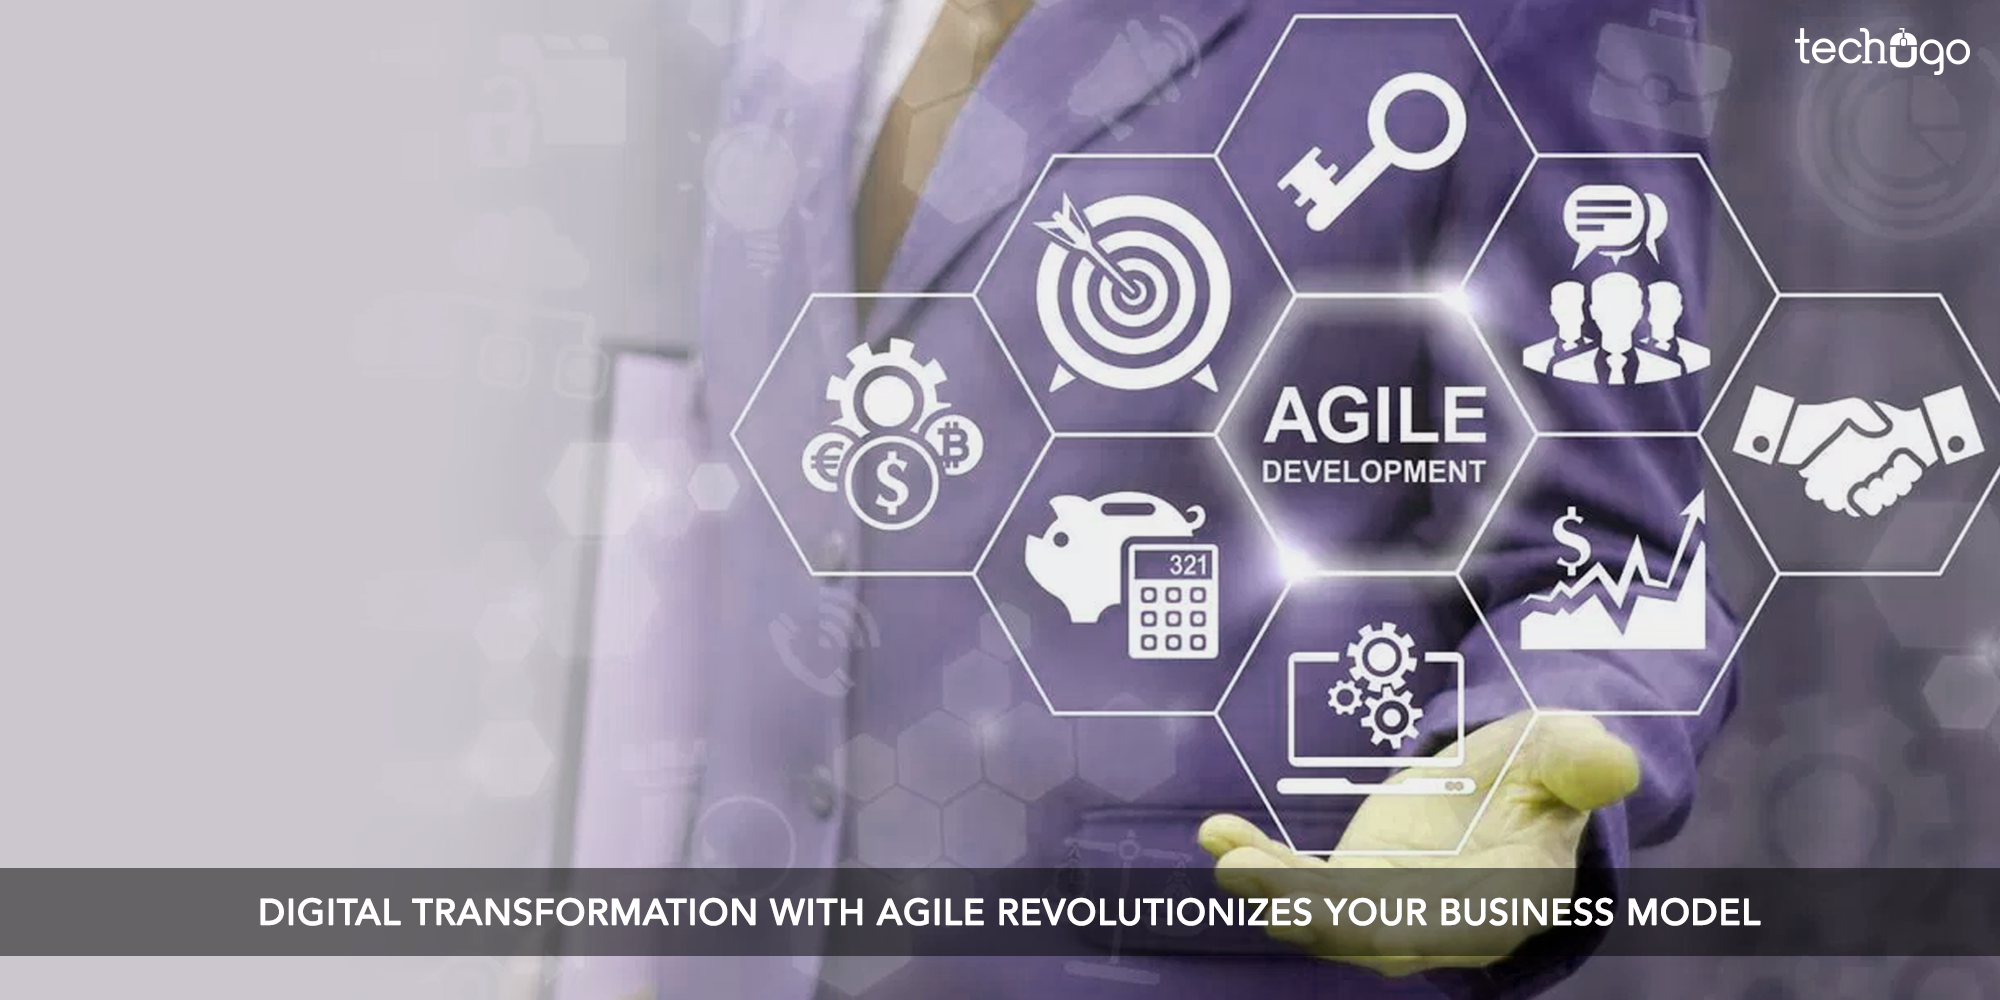 HOW AGILE TECHNOLOGY IS REVOLUTIONIZING YOUR BUSINESS MODEL?